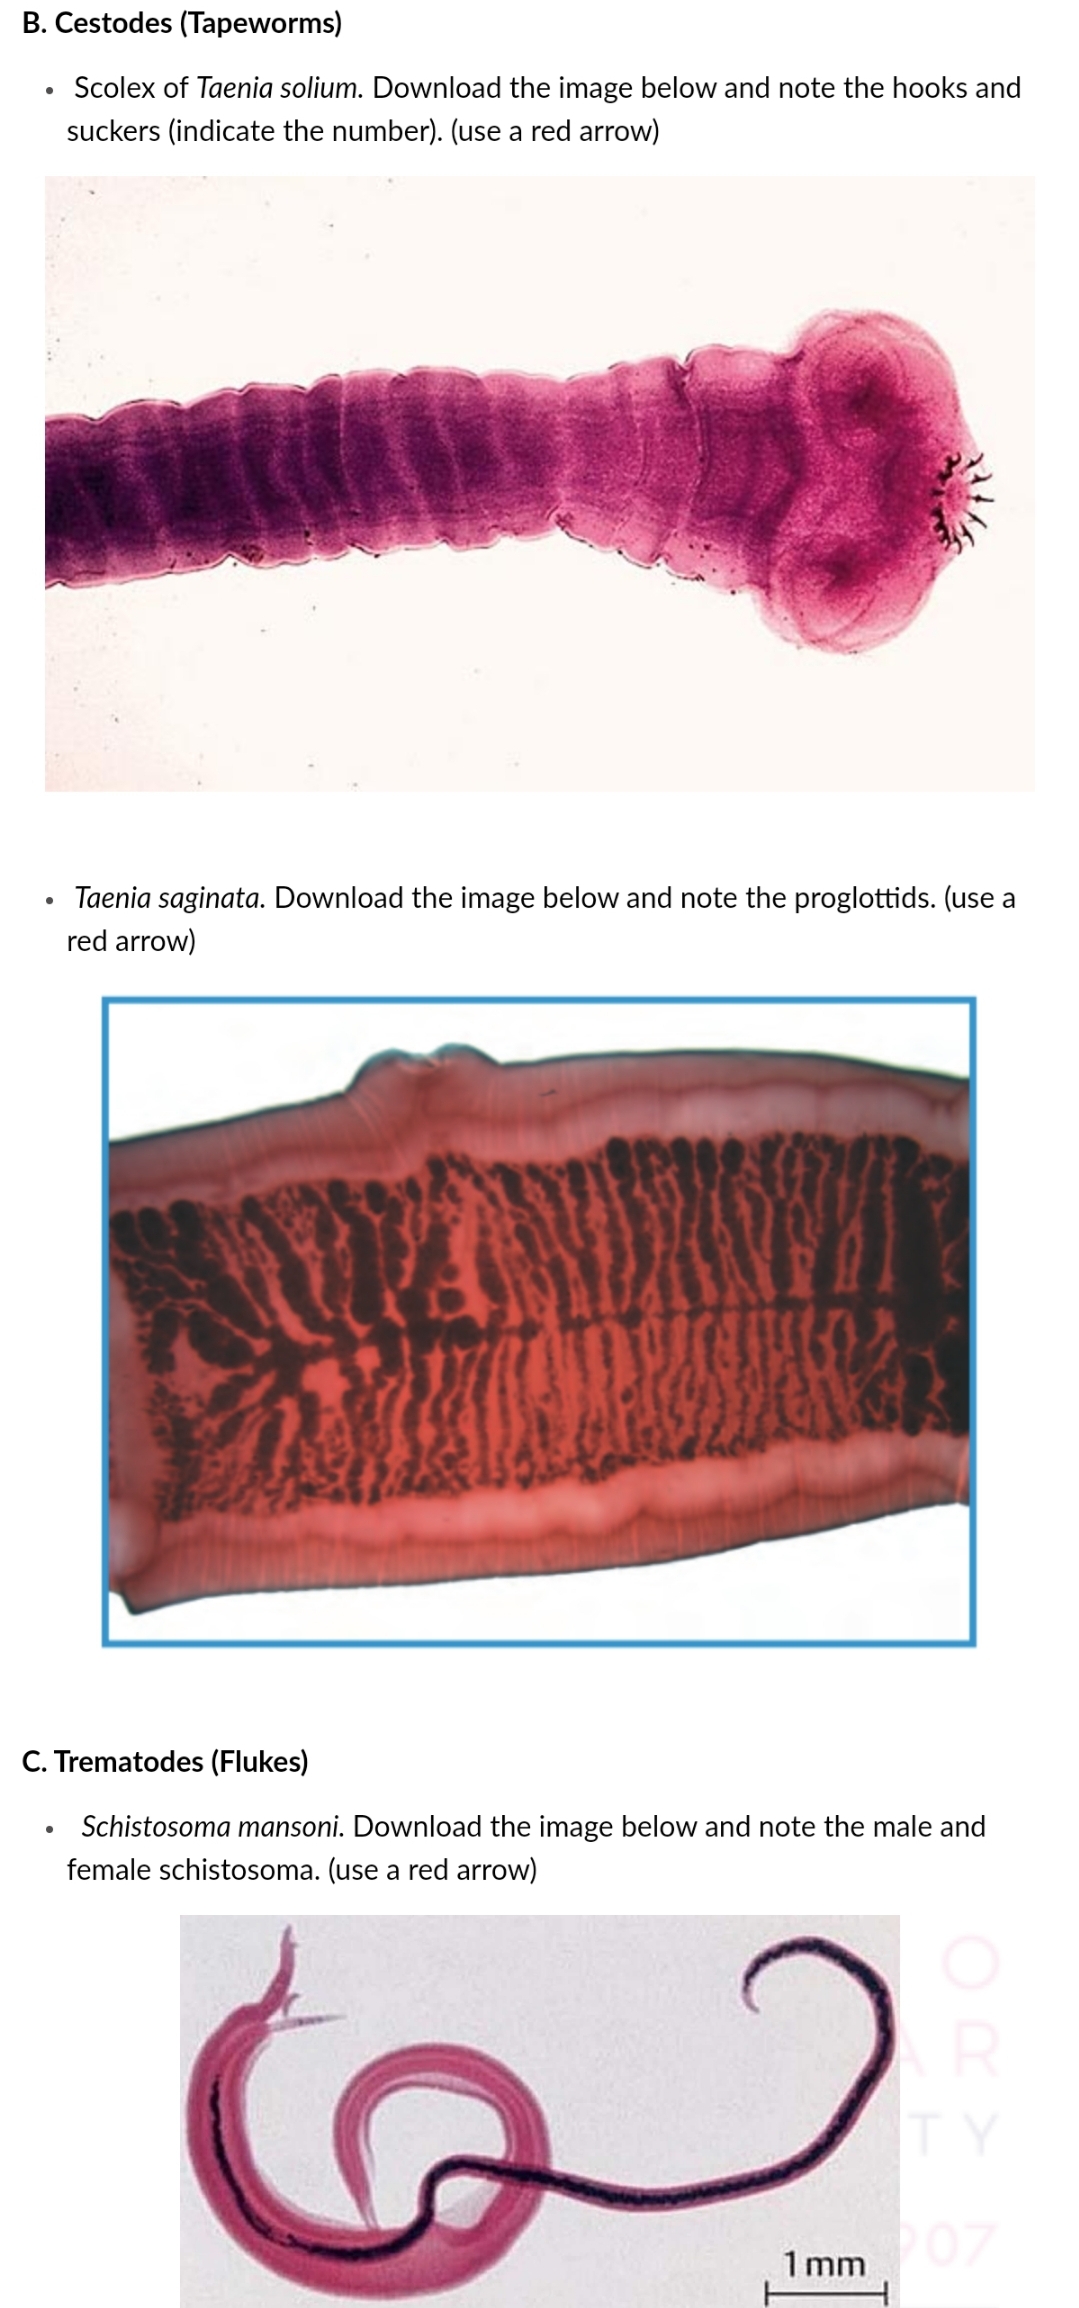 B. Cestodes (Tapeworms)
Scolex of Taenia solium. Download the image below and note the hooks and
suckers (indicate the number). (use a red arrow)
Taenia saginata. Download the image below and note the proglottids. (use a
red arrow)
C. Trematodes (Flukes)
Schistosoma mansoni. Download the image below and note the male and
female schistosoma. (use a red arrow)
TY
1 mm 07
